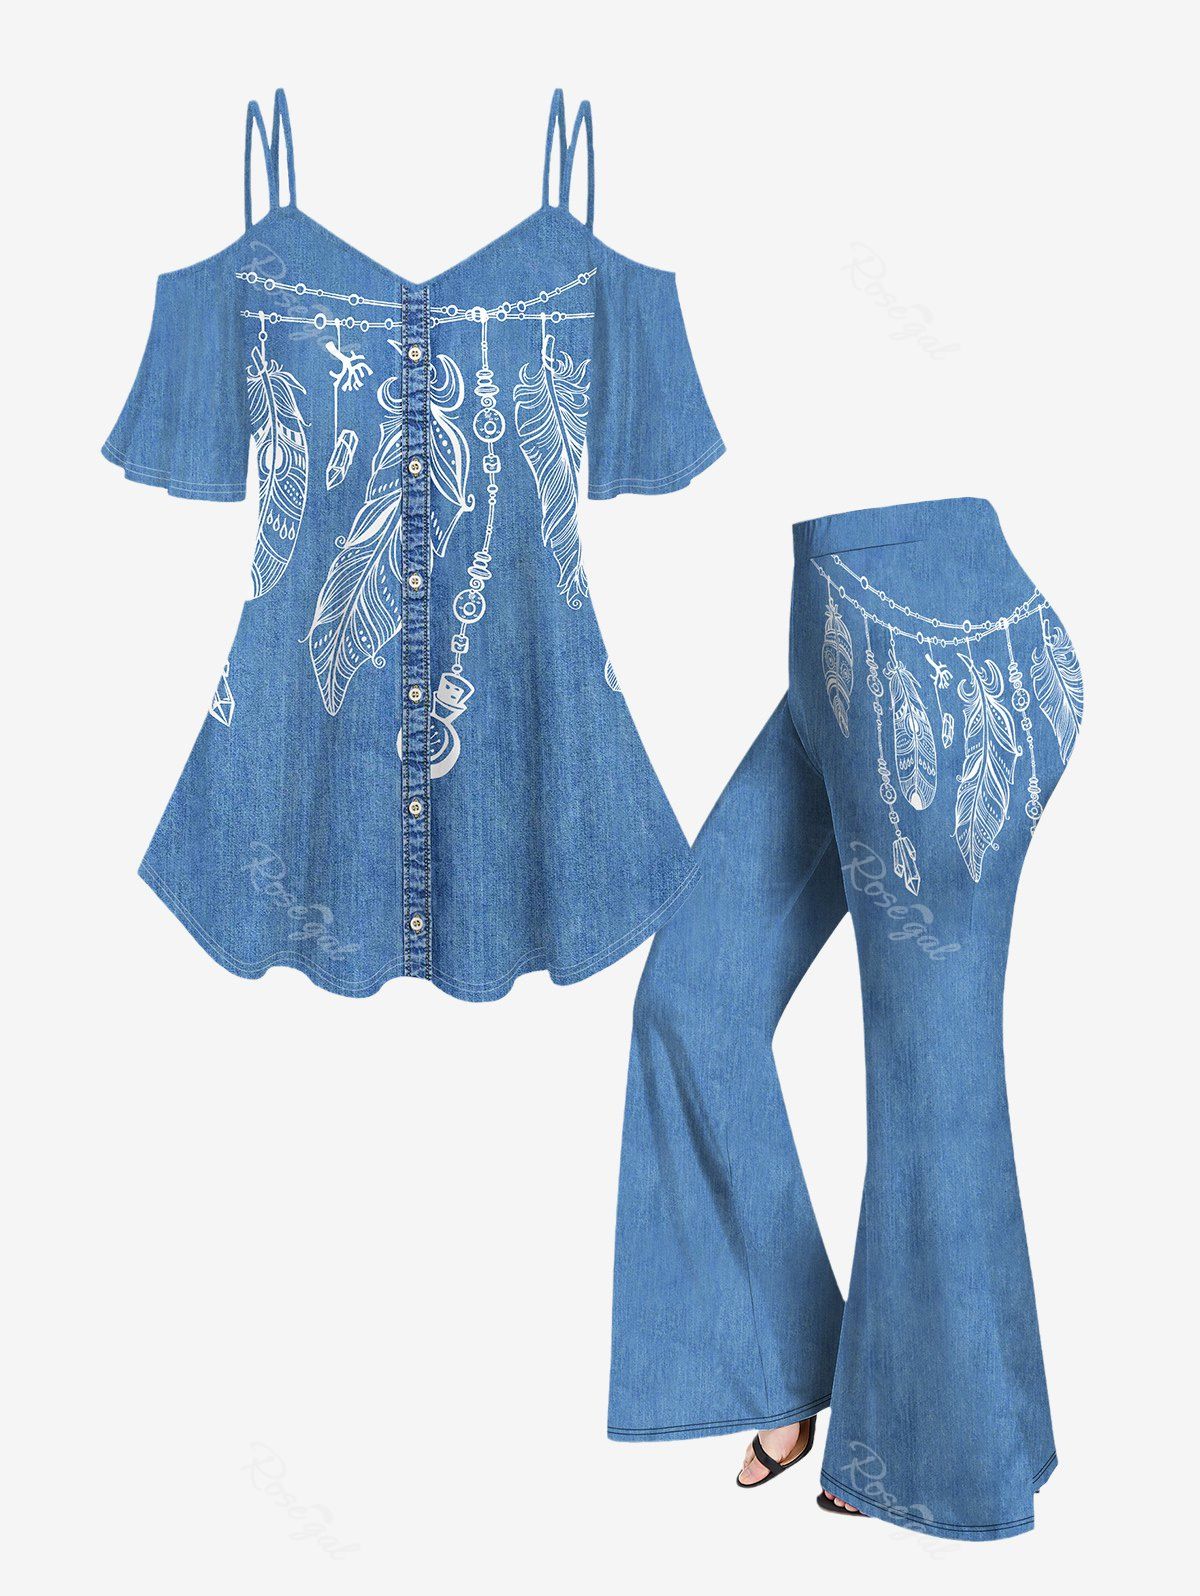 Fancy Plus Size 3D Jeans Buttons And Chains Leaves Feather Print Strap Off Shoulder T-Shirt and 3D Jeans And Chains Leaves Feather Print Flare Pants Outfit  